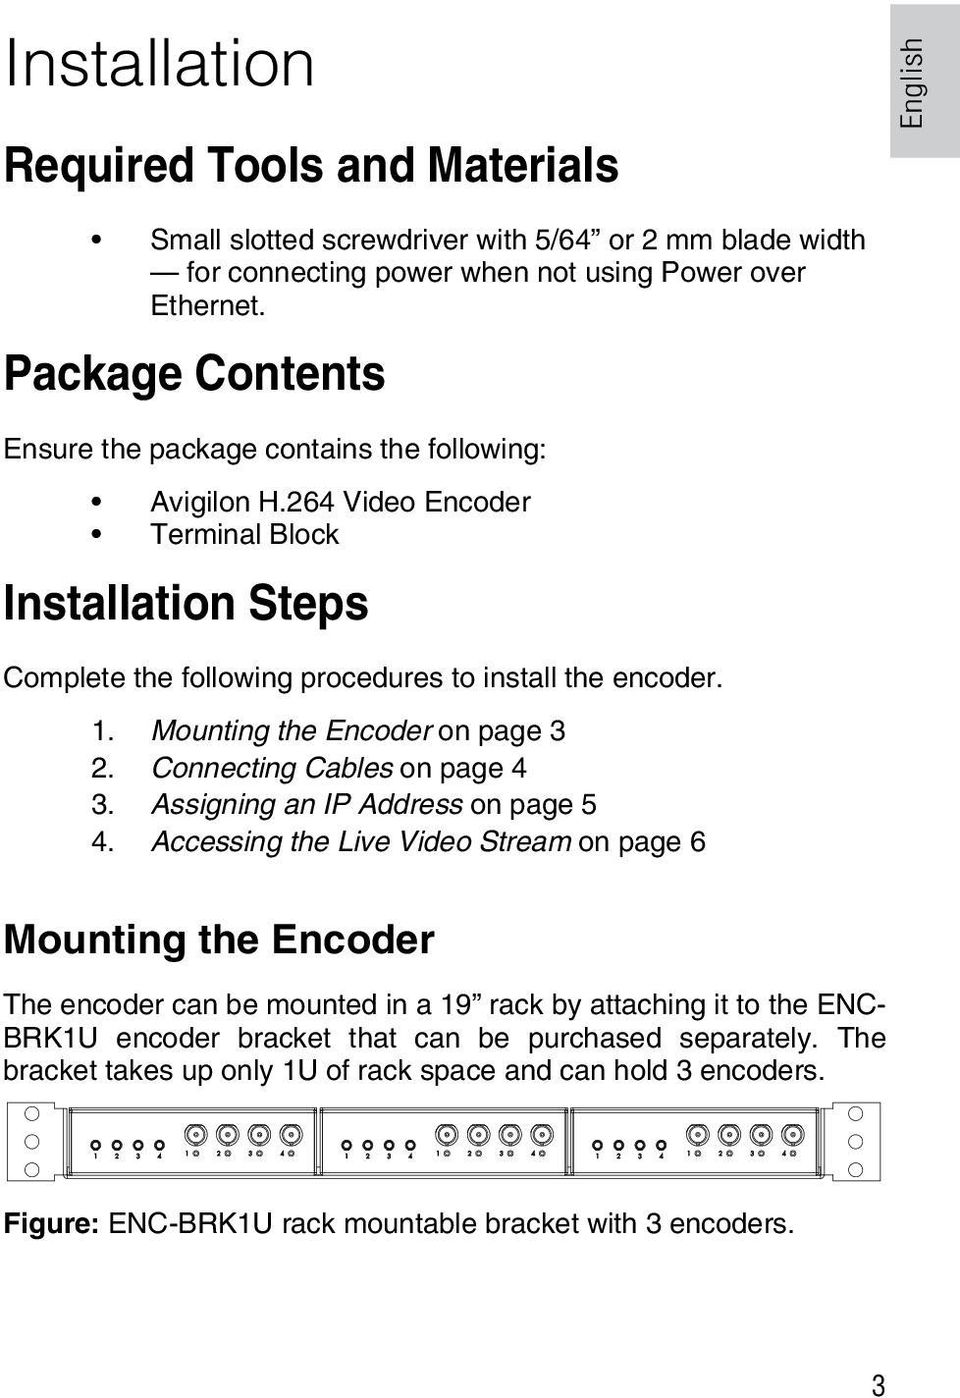 Mounting the Encoder on page 3 2. Connecting Cables on page 4 3. Assigning an IP Address on page 5 4.